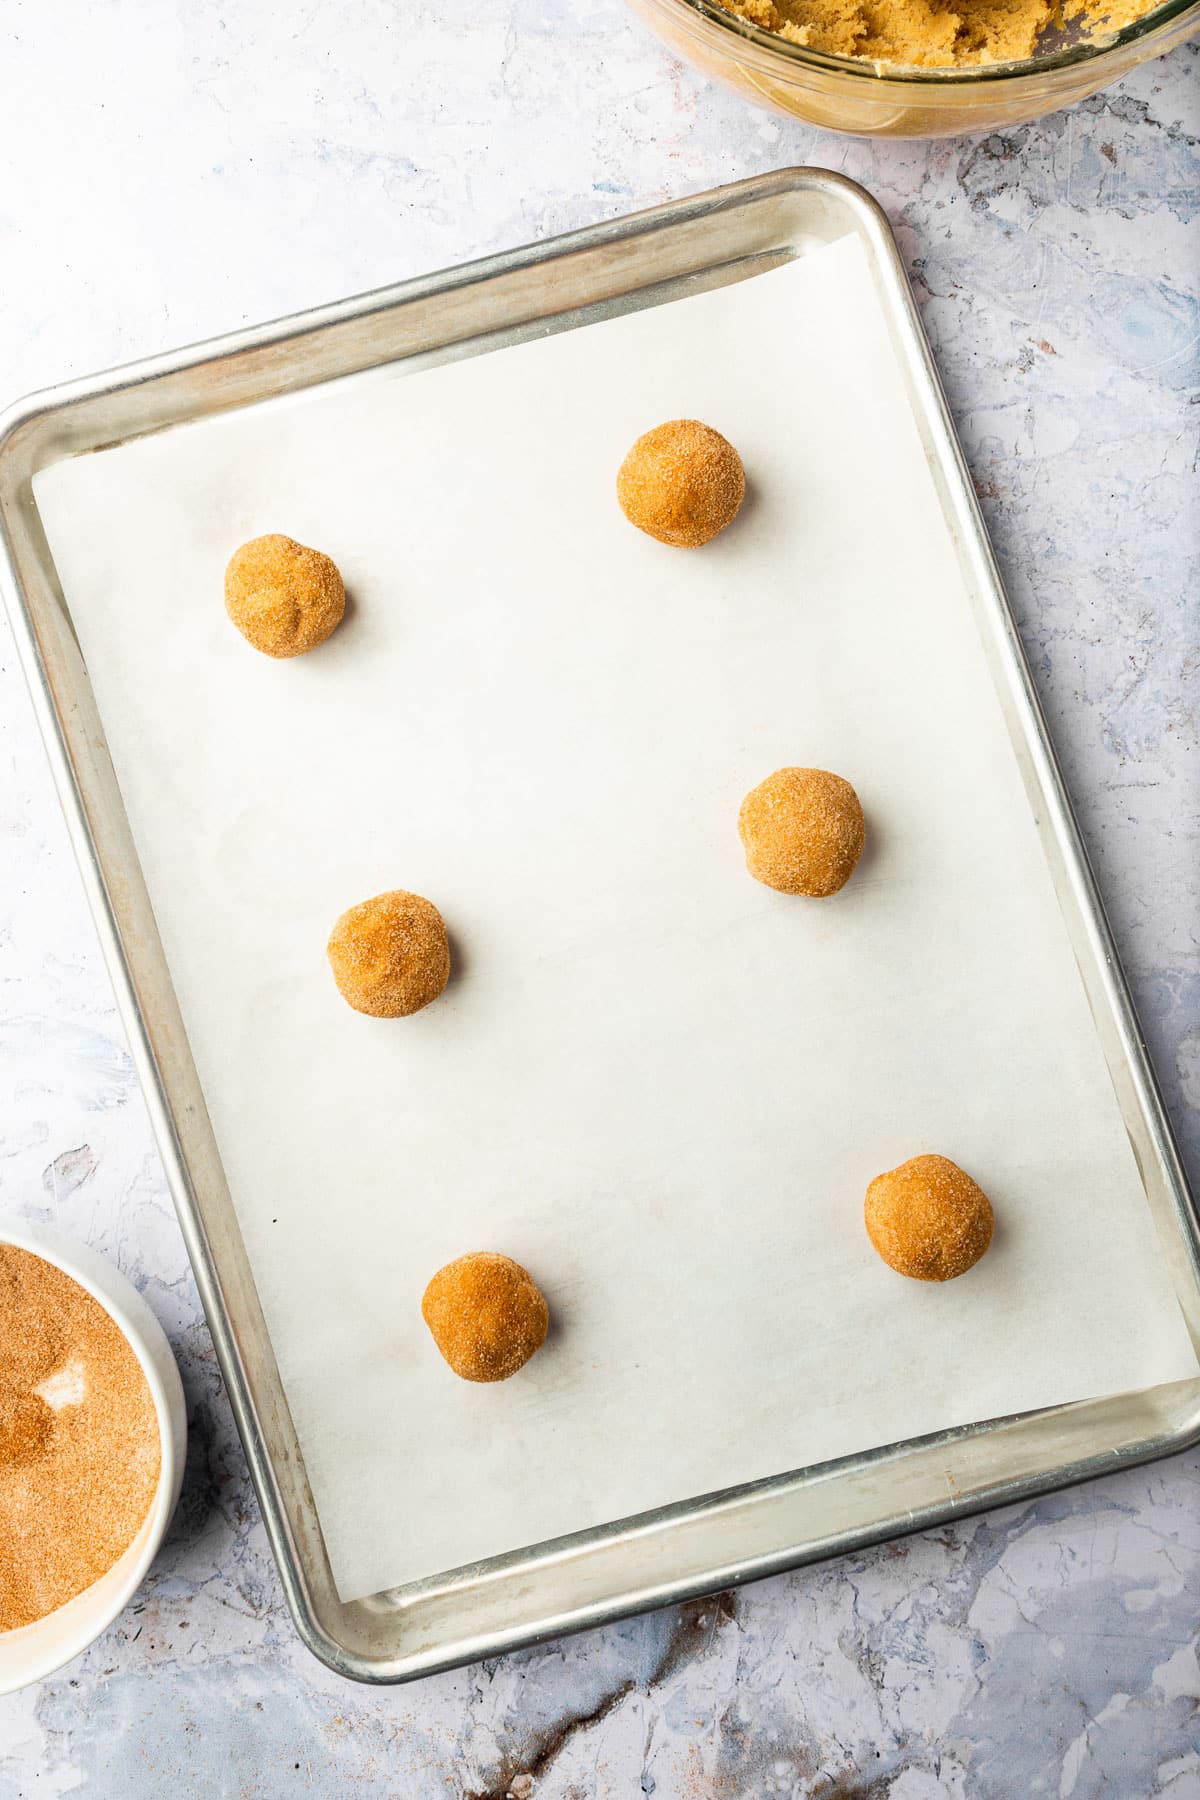 Six gluten-free snickerdoodle cookie dough balls on a baking sheet lined with parchment paper before baking in the oven.